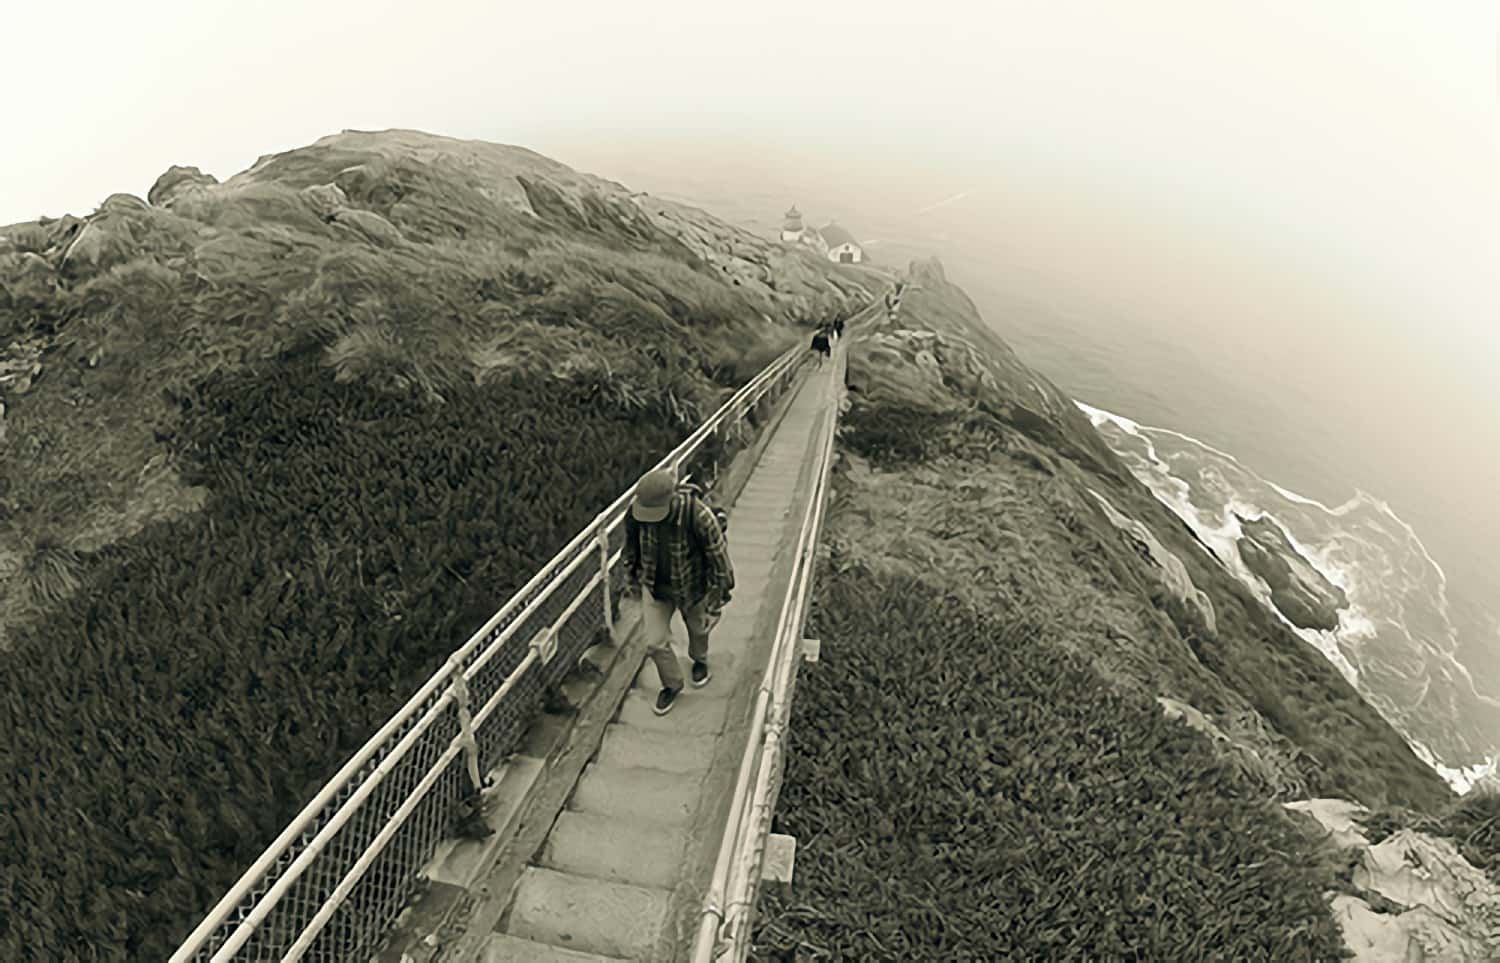 Point Reyes Lighthouse. Source.